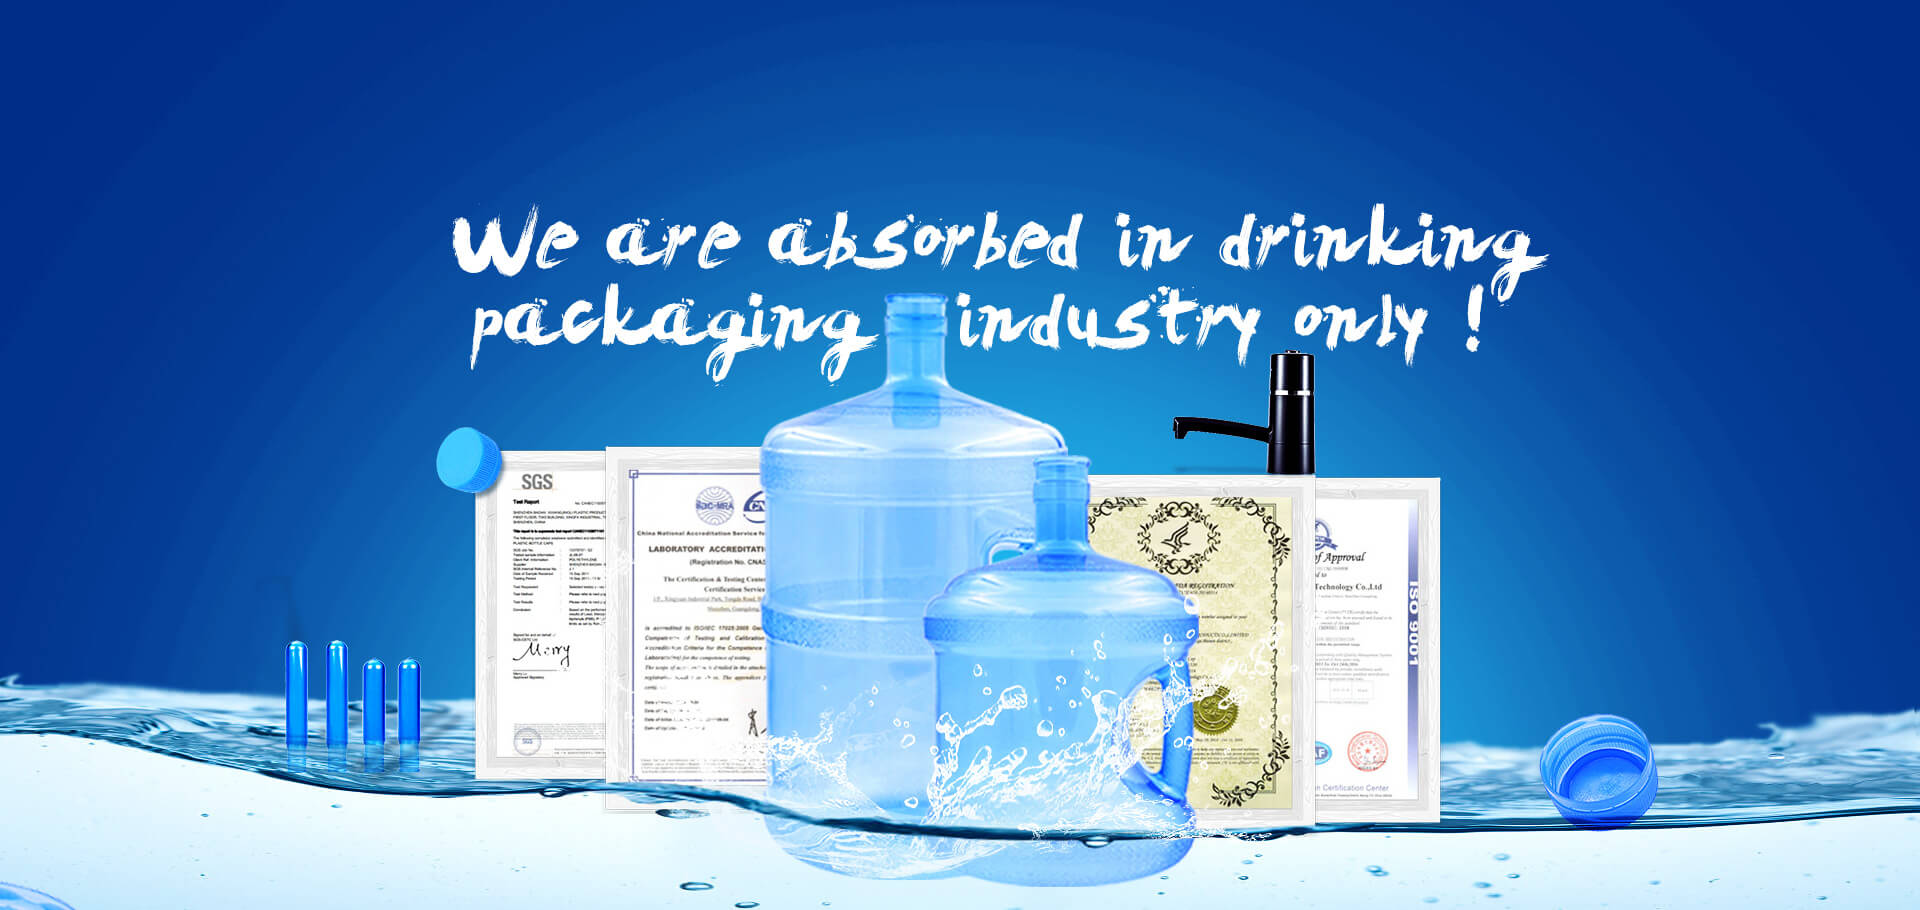 We are absorbed in drinking packaging industry only !  